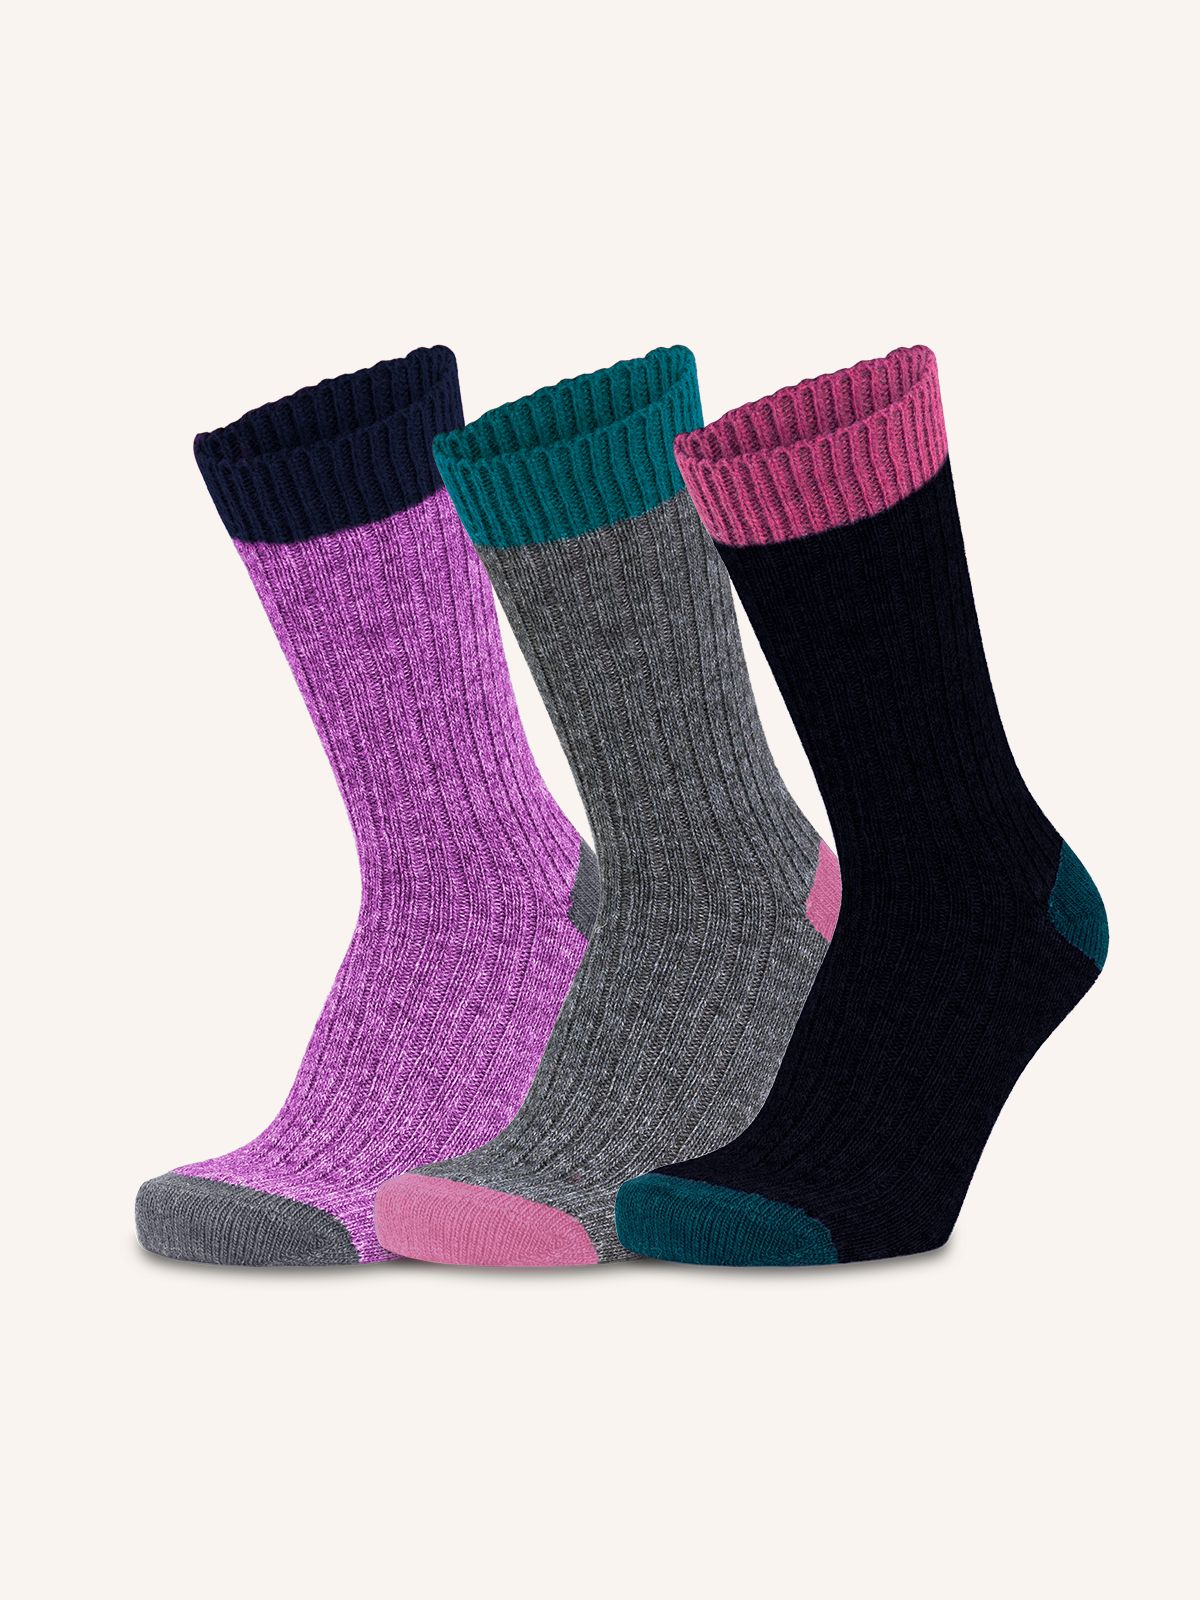 Short Ribbed Socks in Cashmere and Wool Blend for Women | Plain Color | Pack of 3 pairs | Cachelife DC